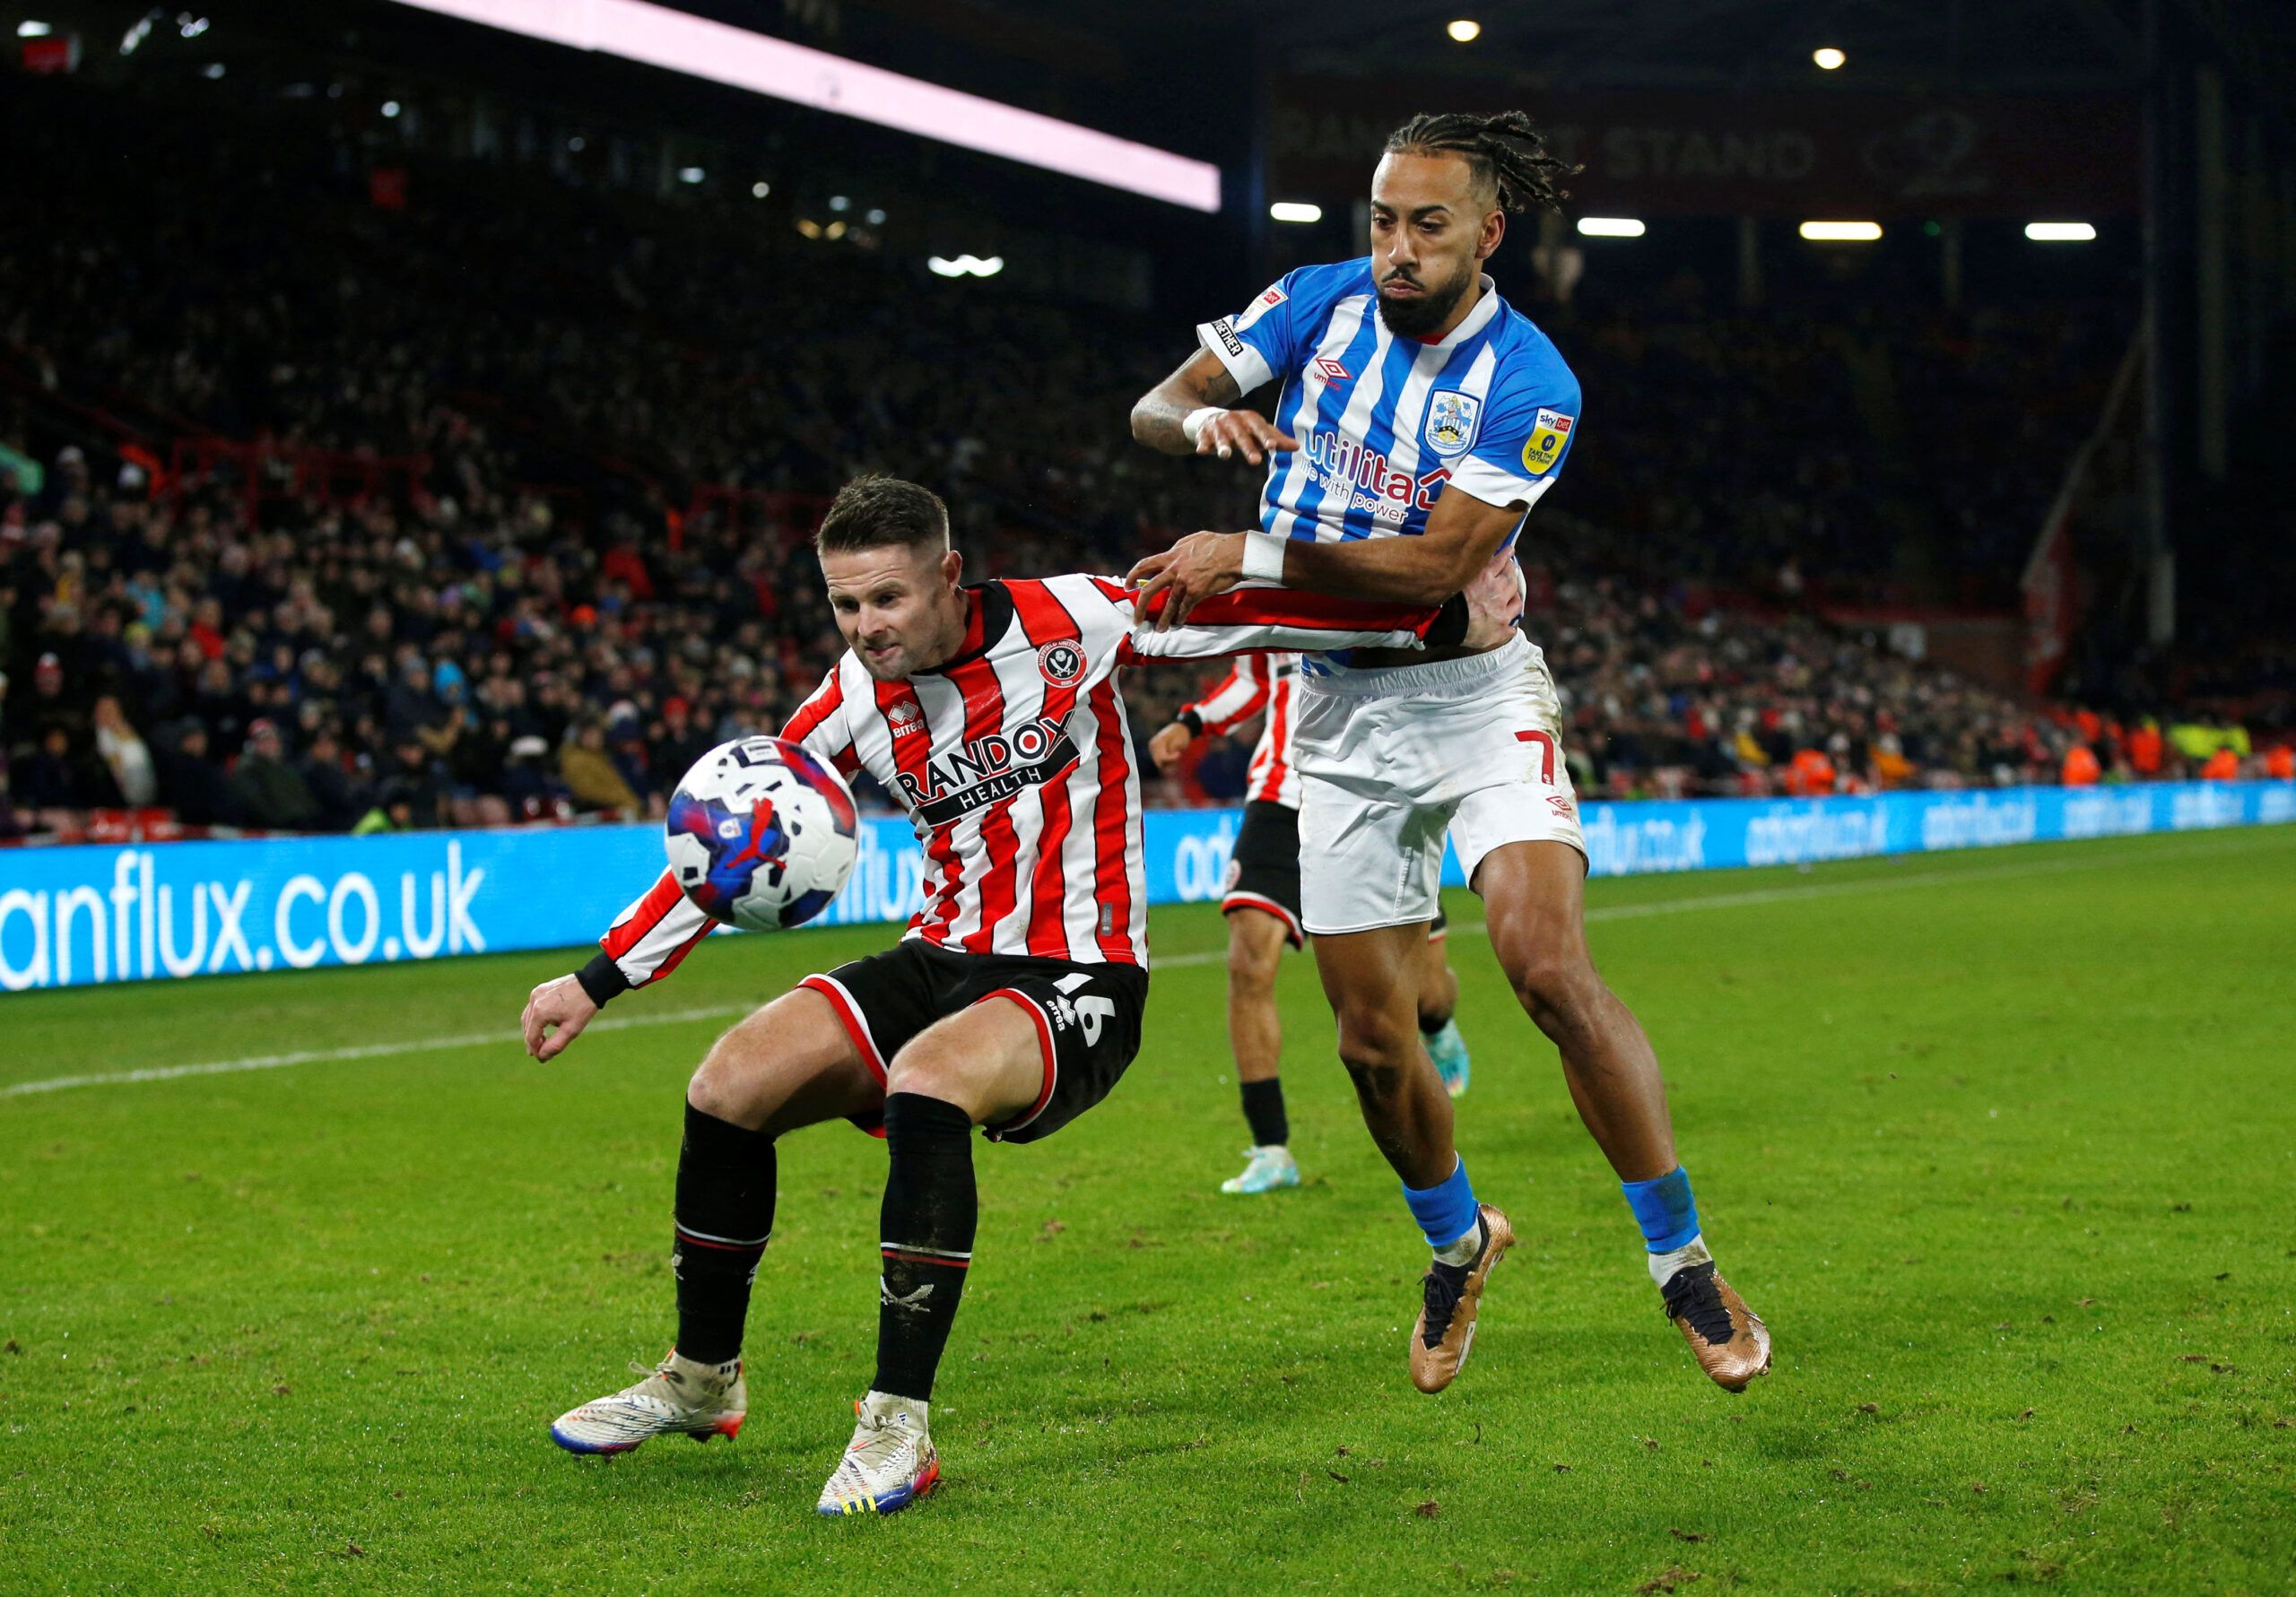 Soccer Football - Championship - Sheffield United v Huddersfield Town - Bramall Lane, Sheffield, Britain - December 10, 2022  Sheffield United's Oliver Norwood in action with Huddersfield Town's Sorba Thomas  Action Images/Ed Sykes  EDITORIAL USE ONLY. No use with unauthorized audio, video, data, fixture lists, club/league logos or 